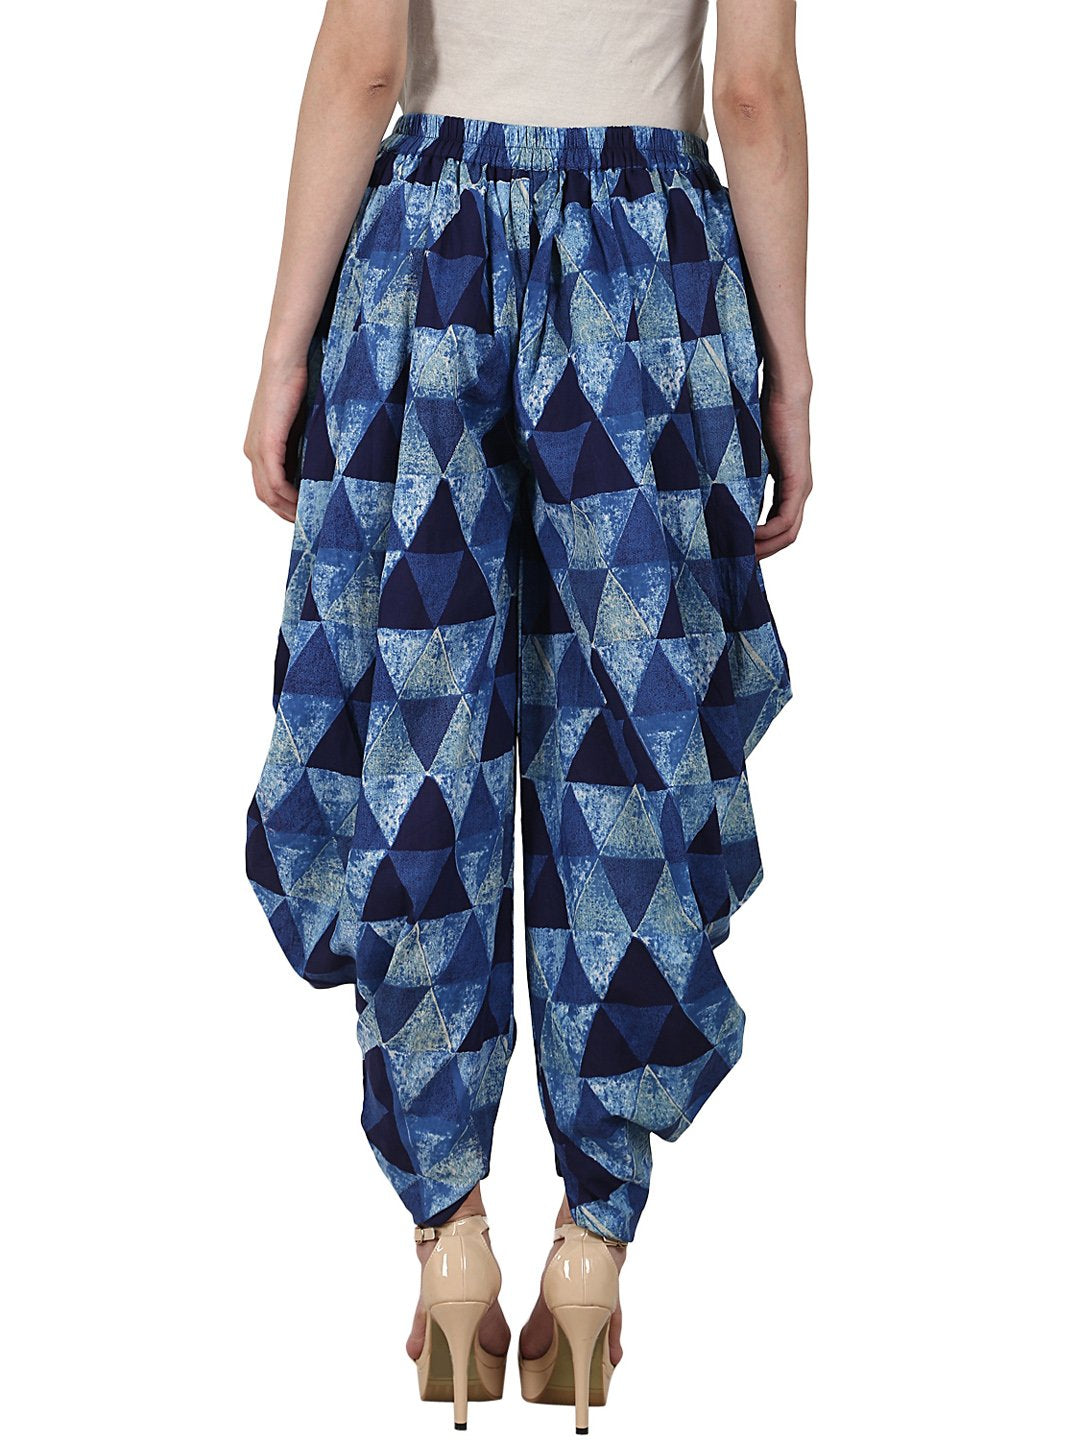 Women's Blue Printed Ankle Length Cotton Dhoti - Nayo Clothing